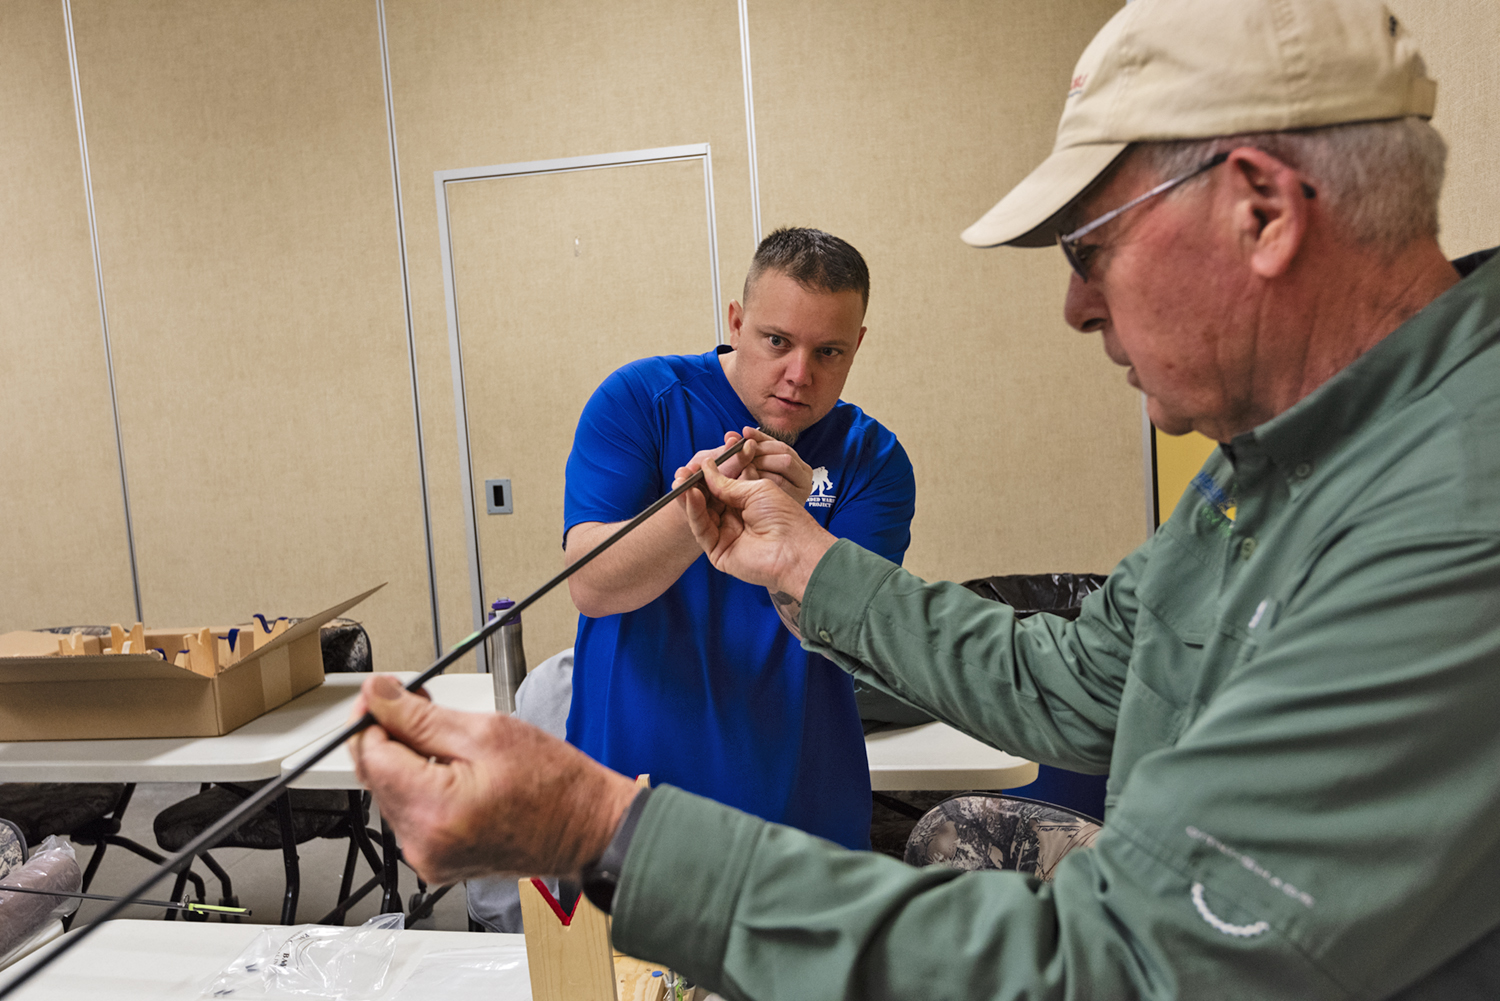 Fly rod building class for beginners starts in January